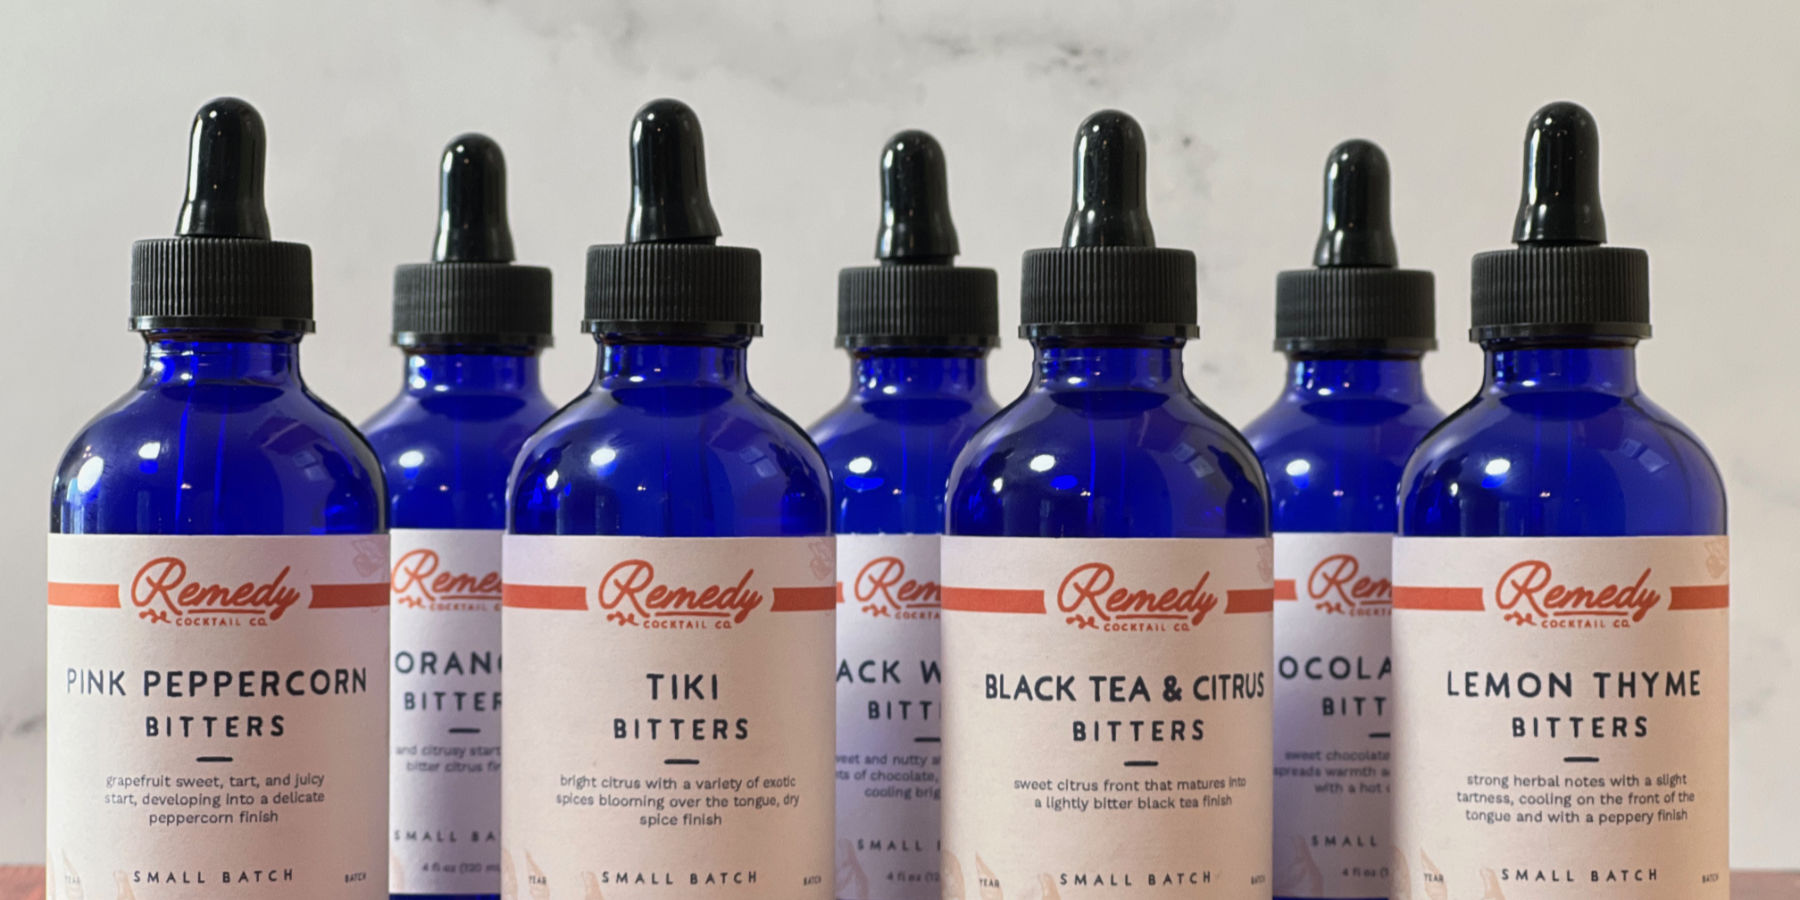 Remedy Cocktail Company - Crafted Cocktails In A Dash. Contact us for wholesale opportunities